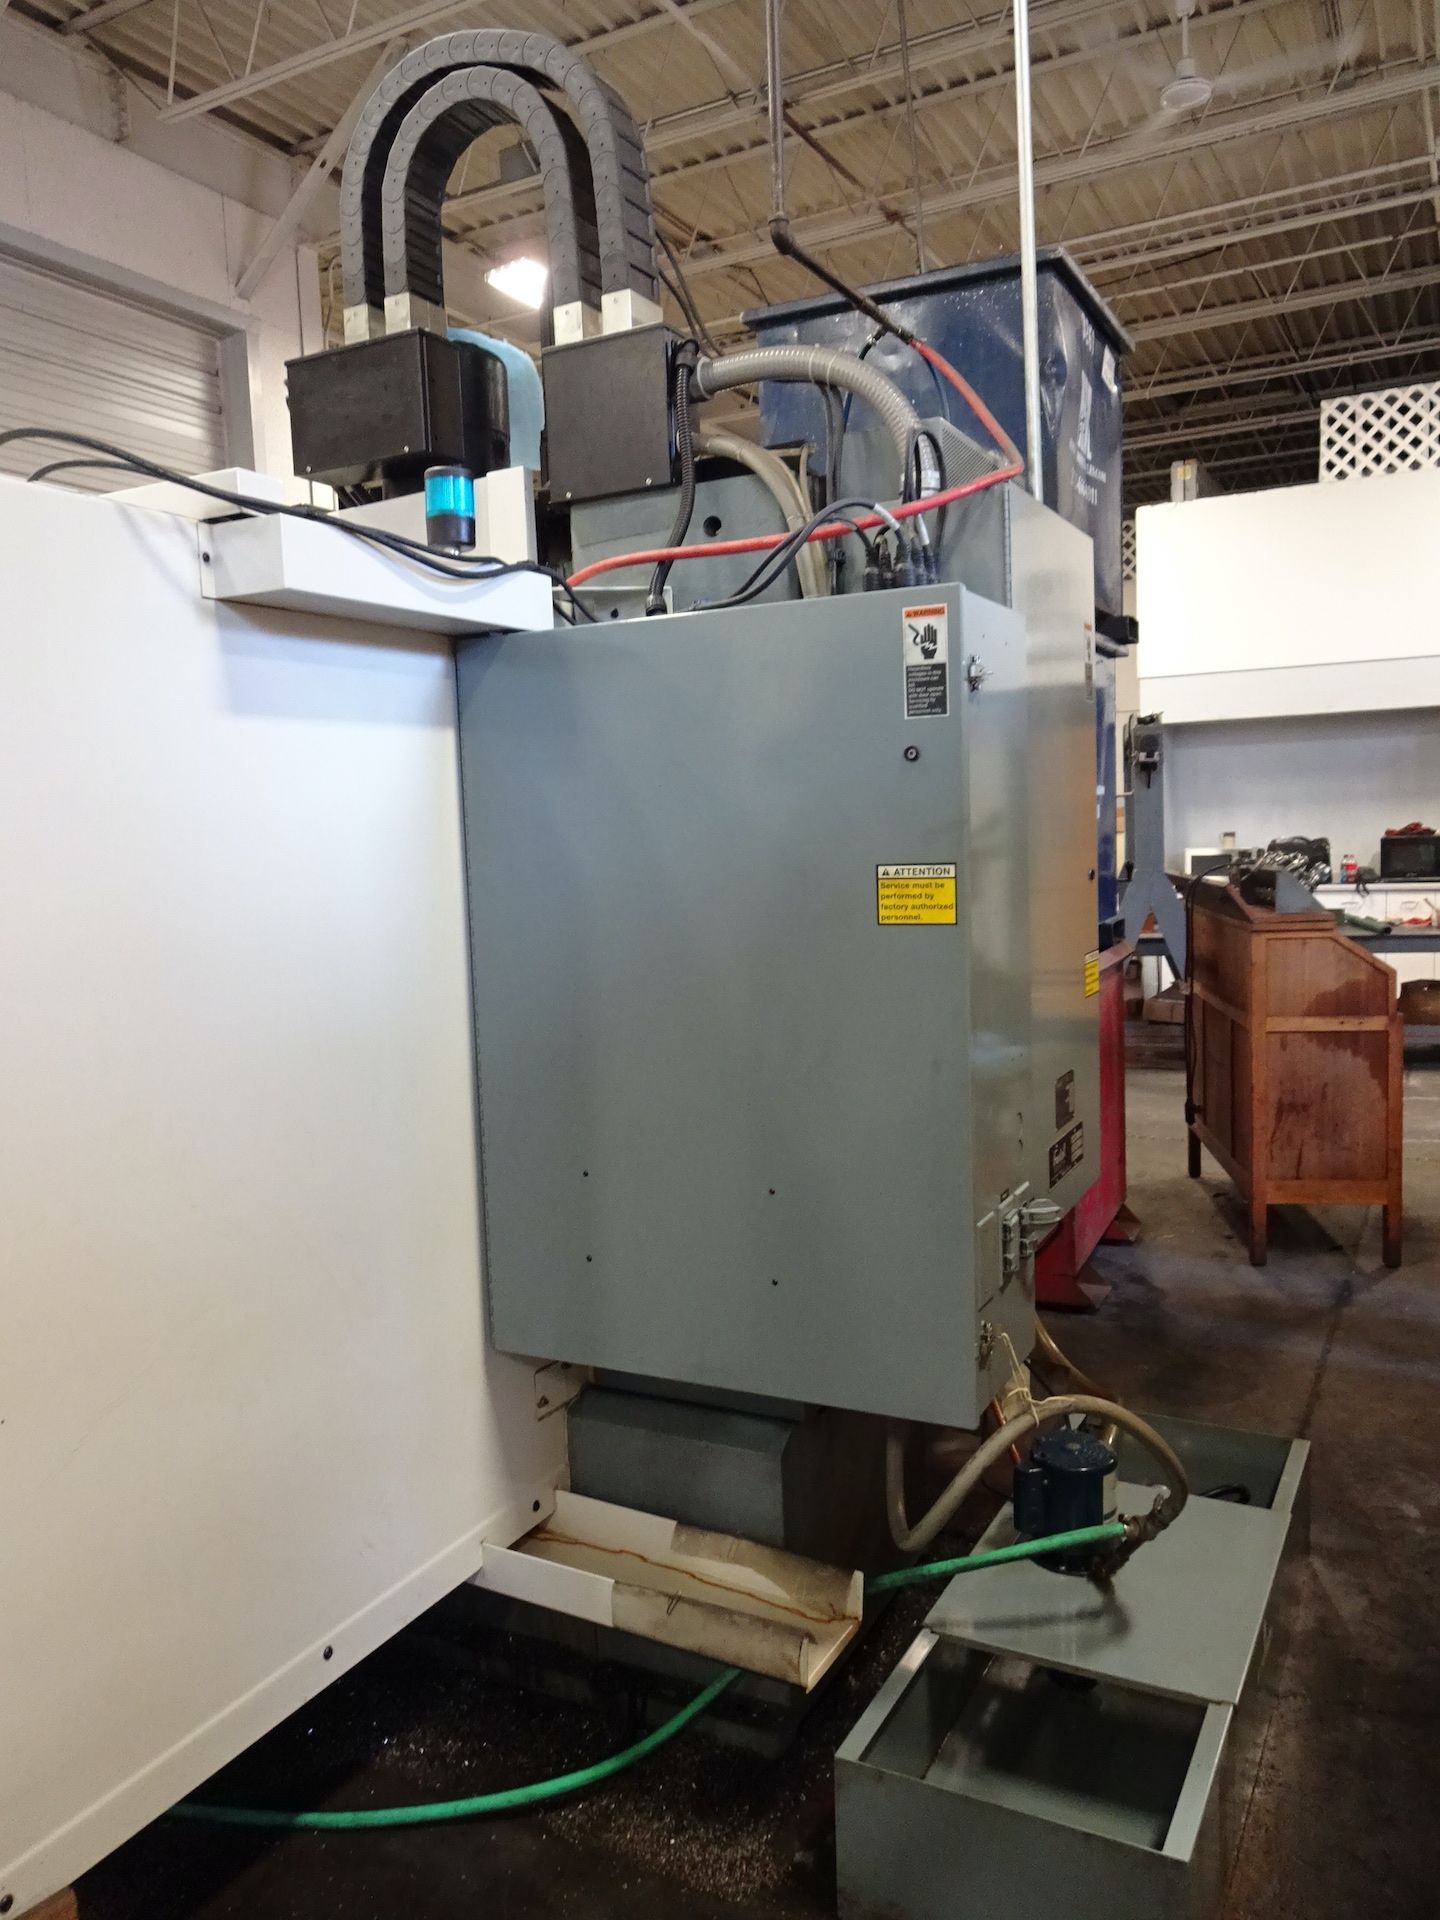 Fadal Model VMC5020A CNC Vertical Machining Center, S/N 9810947 (1998), 7500 RPM Spindle, 21 Station - Image 21 of 24